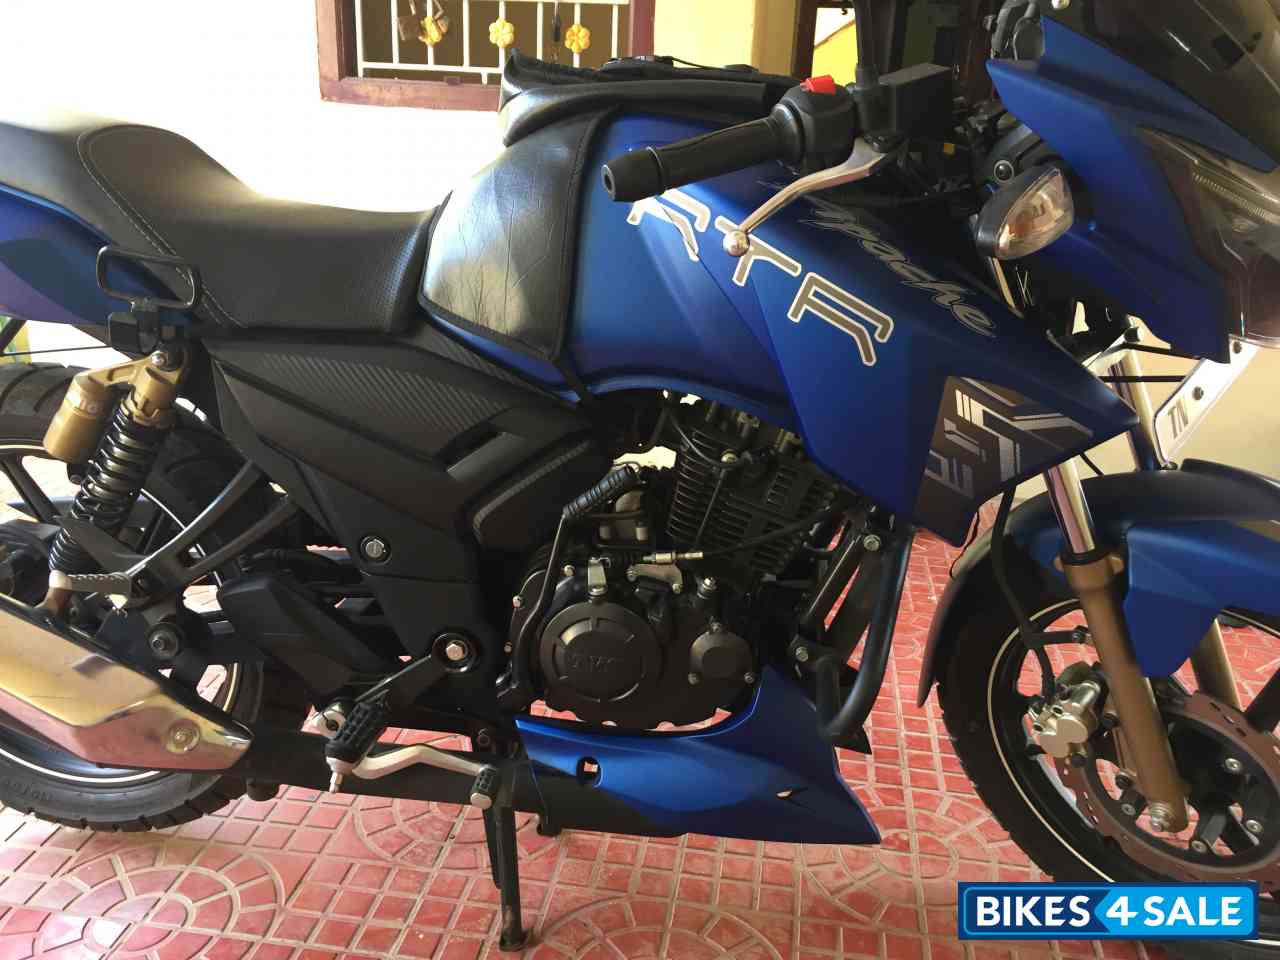 Used 2017 Model Tvs Apache Rtr 180 For Sale In Thanjavur Id